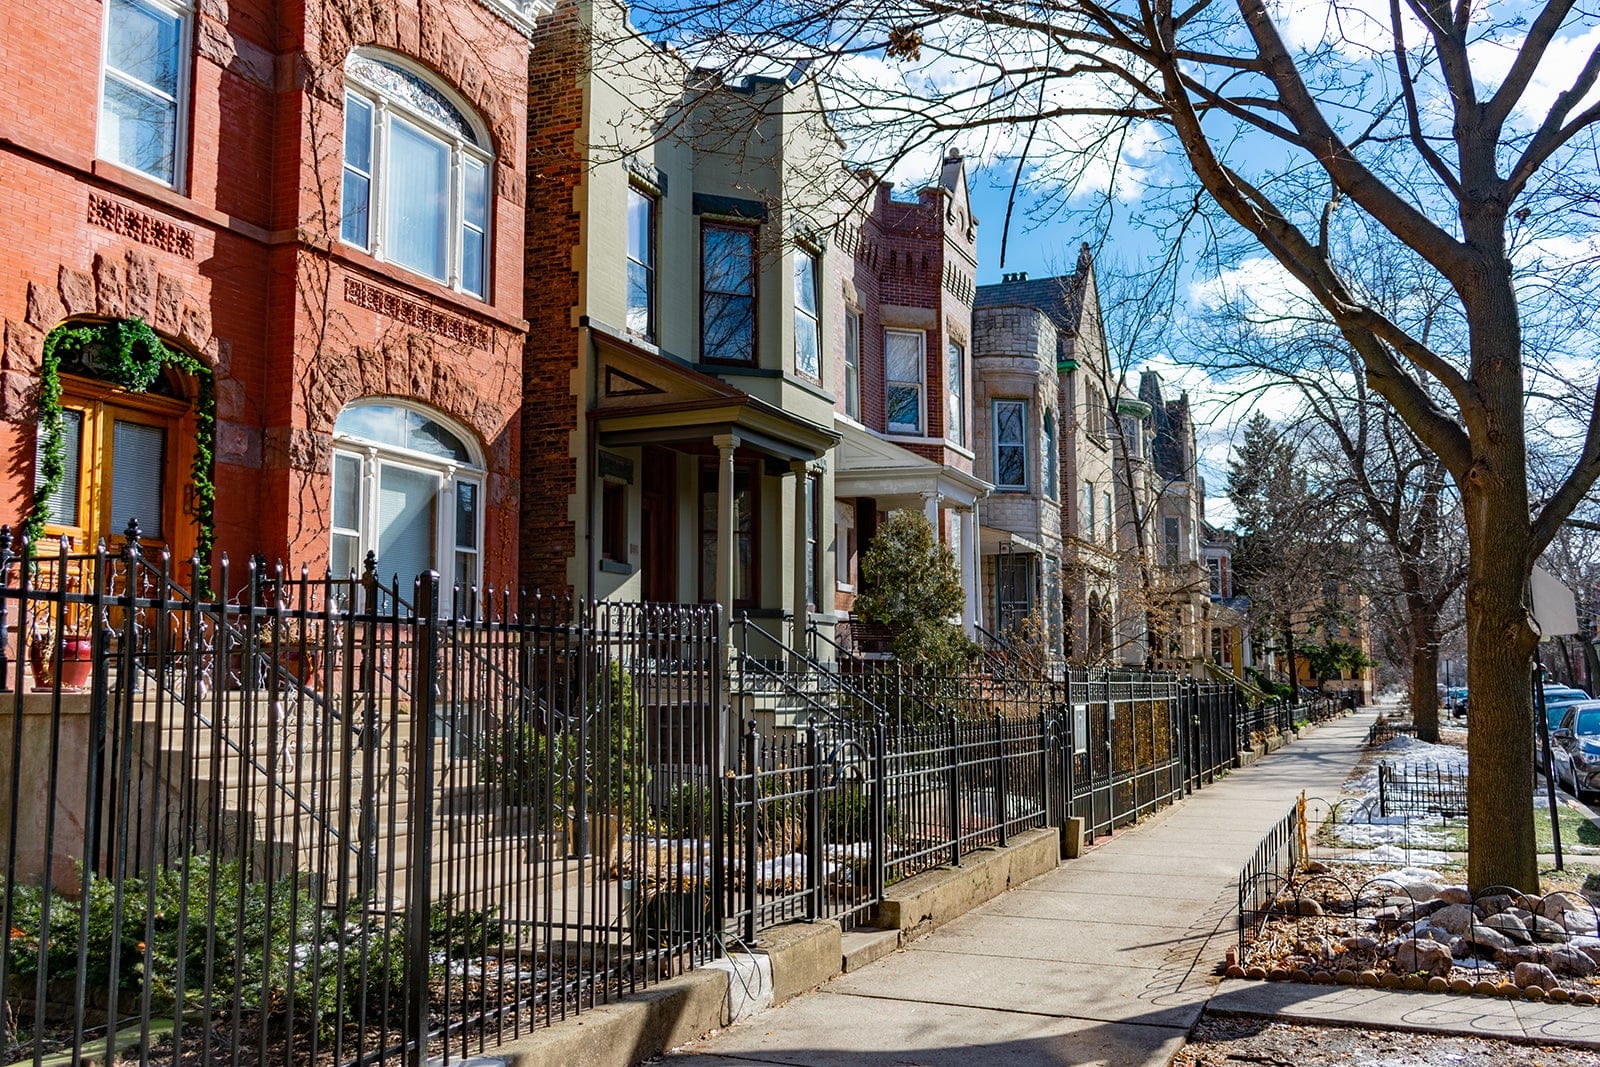 New book details Lincoln Park's gentrification history - Curbed Chicago